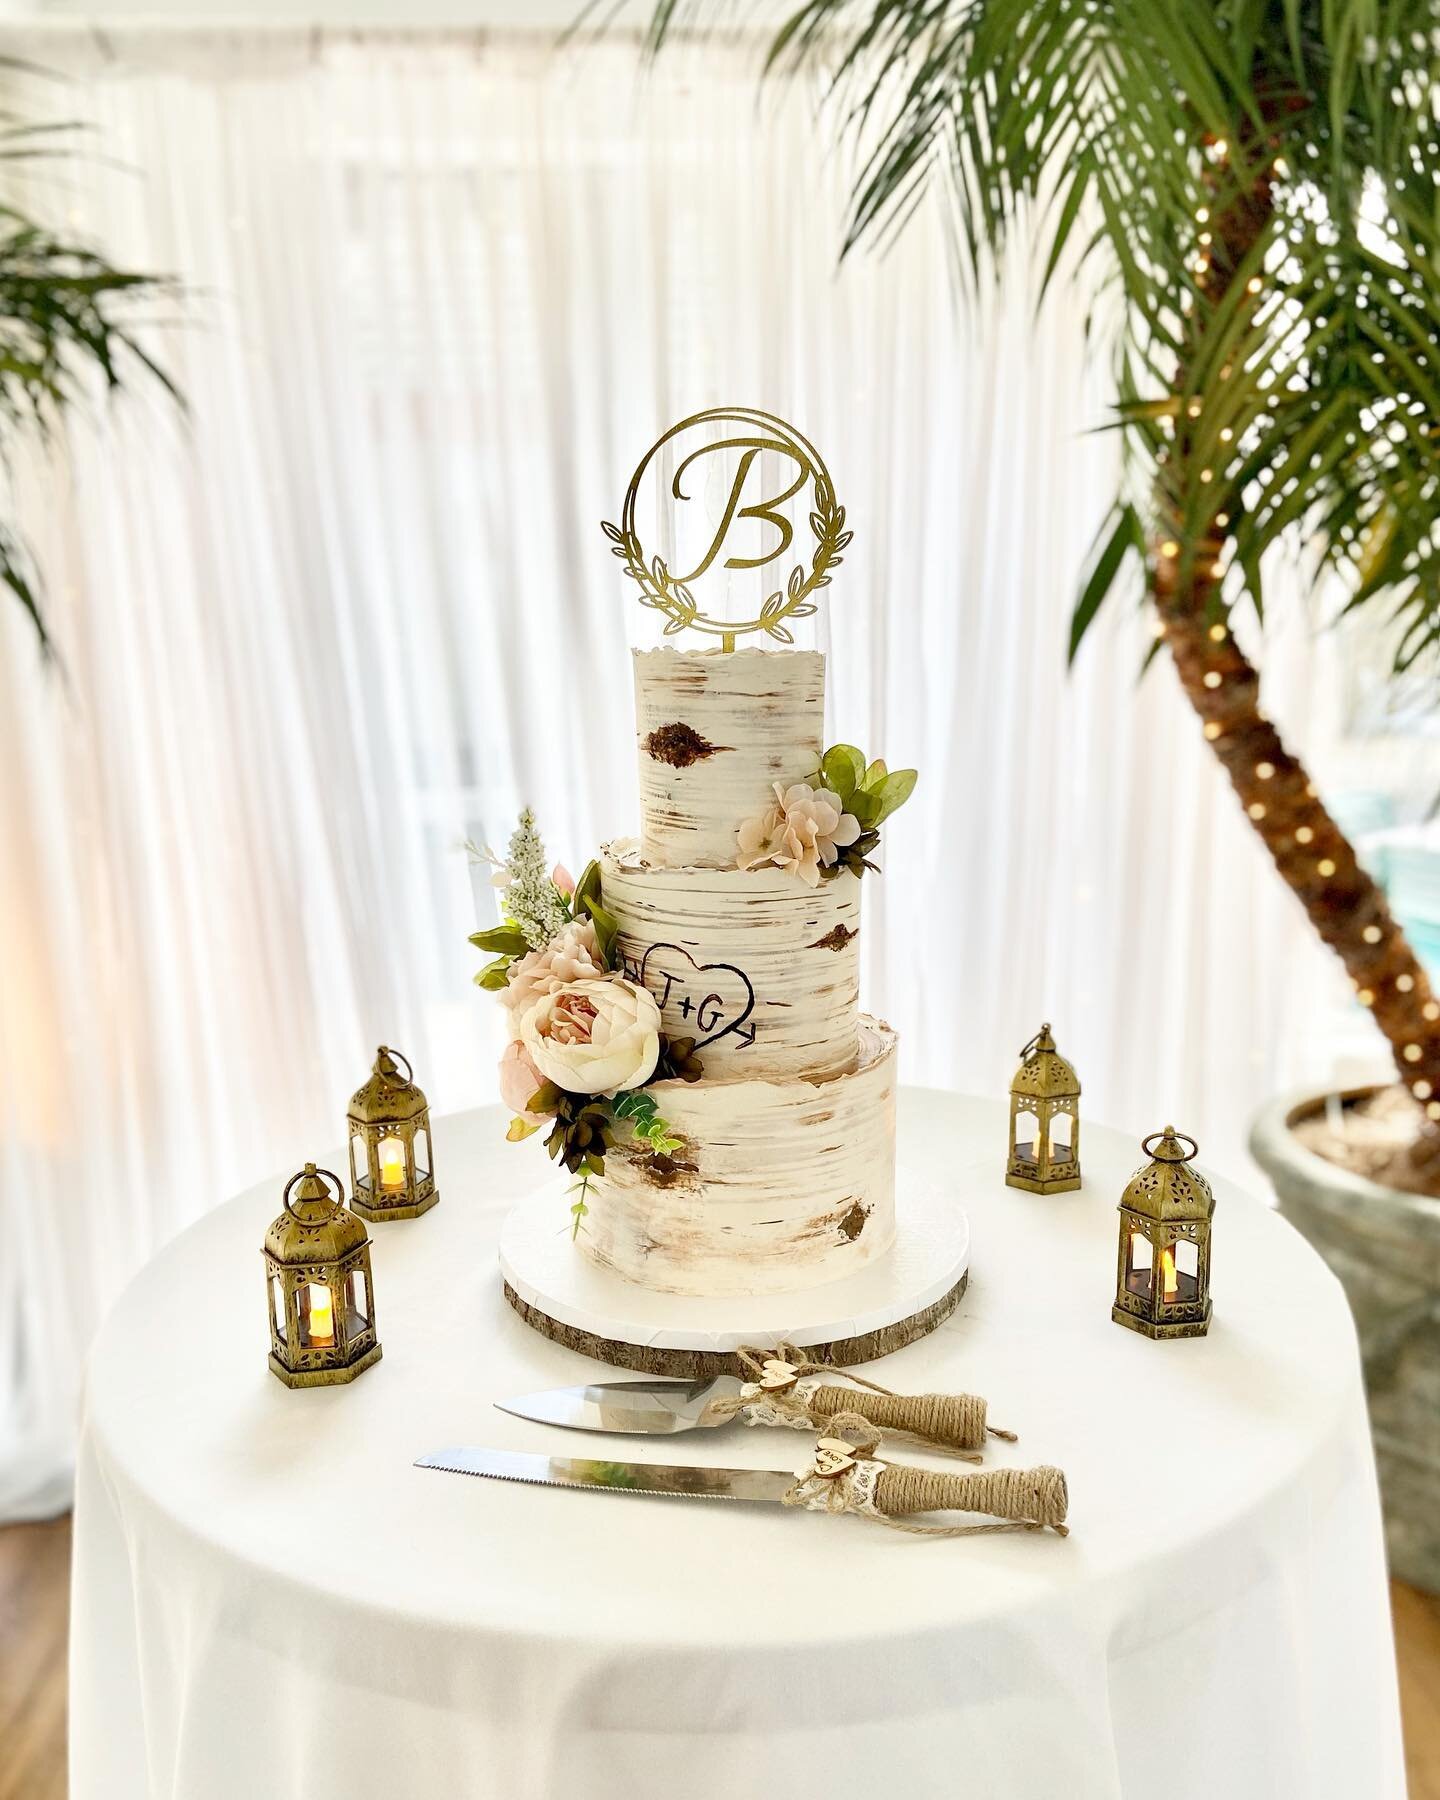 Birch Tree Style Wedding Cake from a wedding in Ocean Isle at @theislesbeachclub

I'm always looking to keep perfecting this style of cake and strive to make it look as realistic as possible.

Congratulations to all my fall couples! ❤️